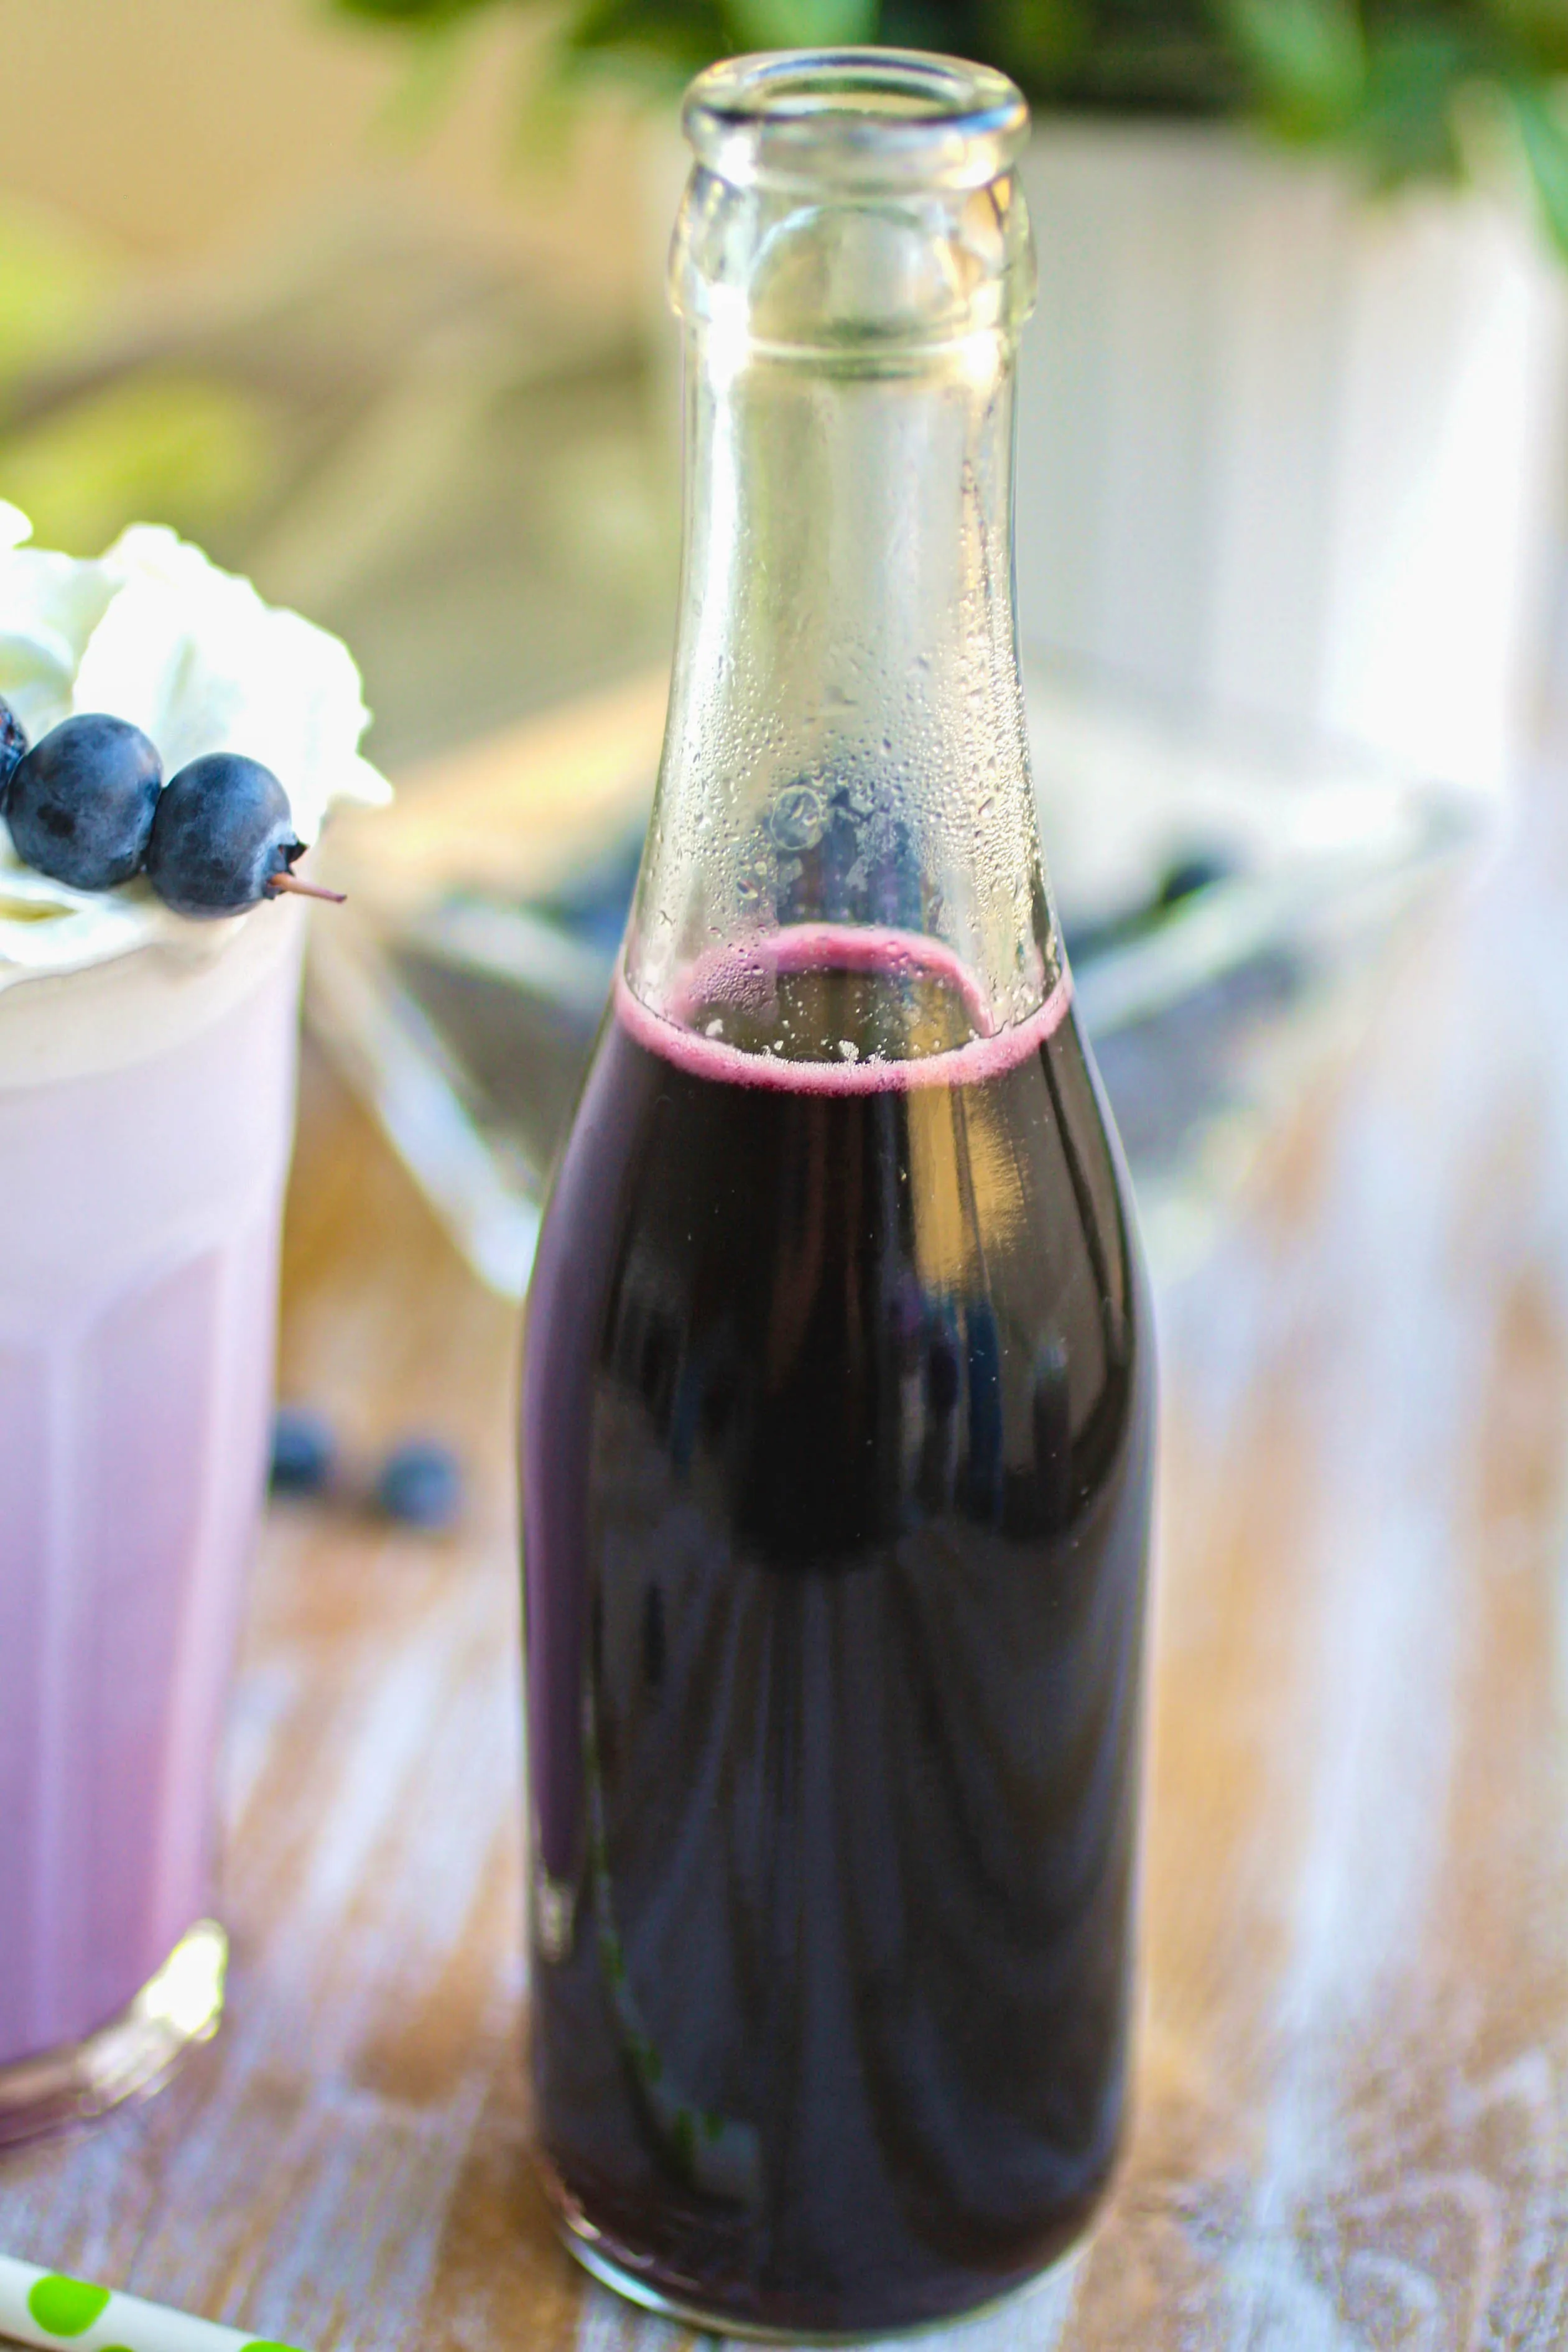 Blueberry Italian Cream Soda drinks are a treat, for sure! You'll love these Blueberry Italian Cream Soda drinks for their pretty color and flavor.